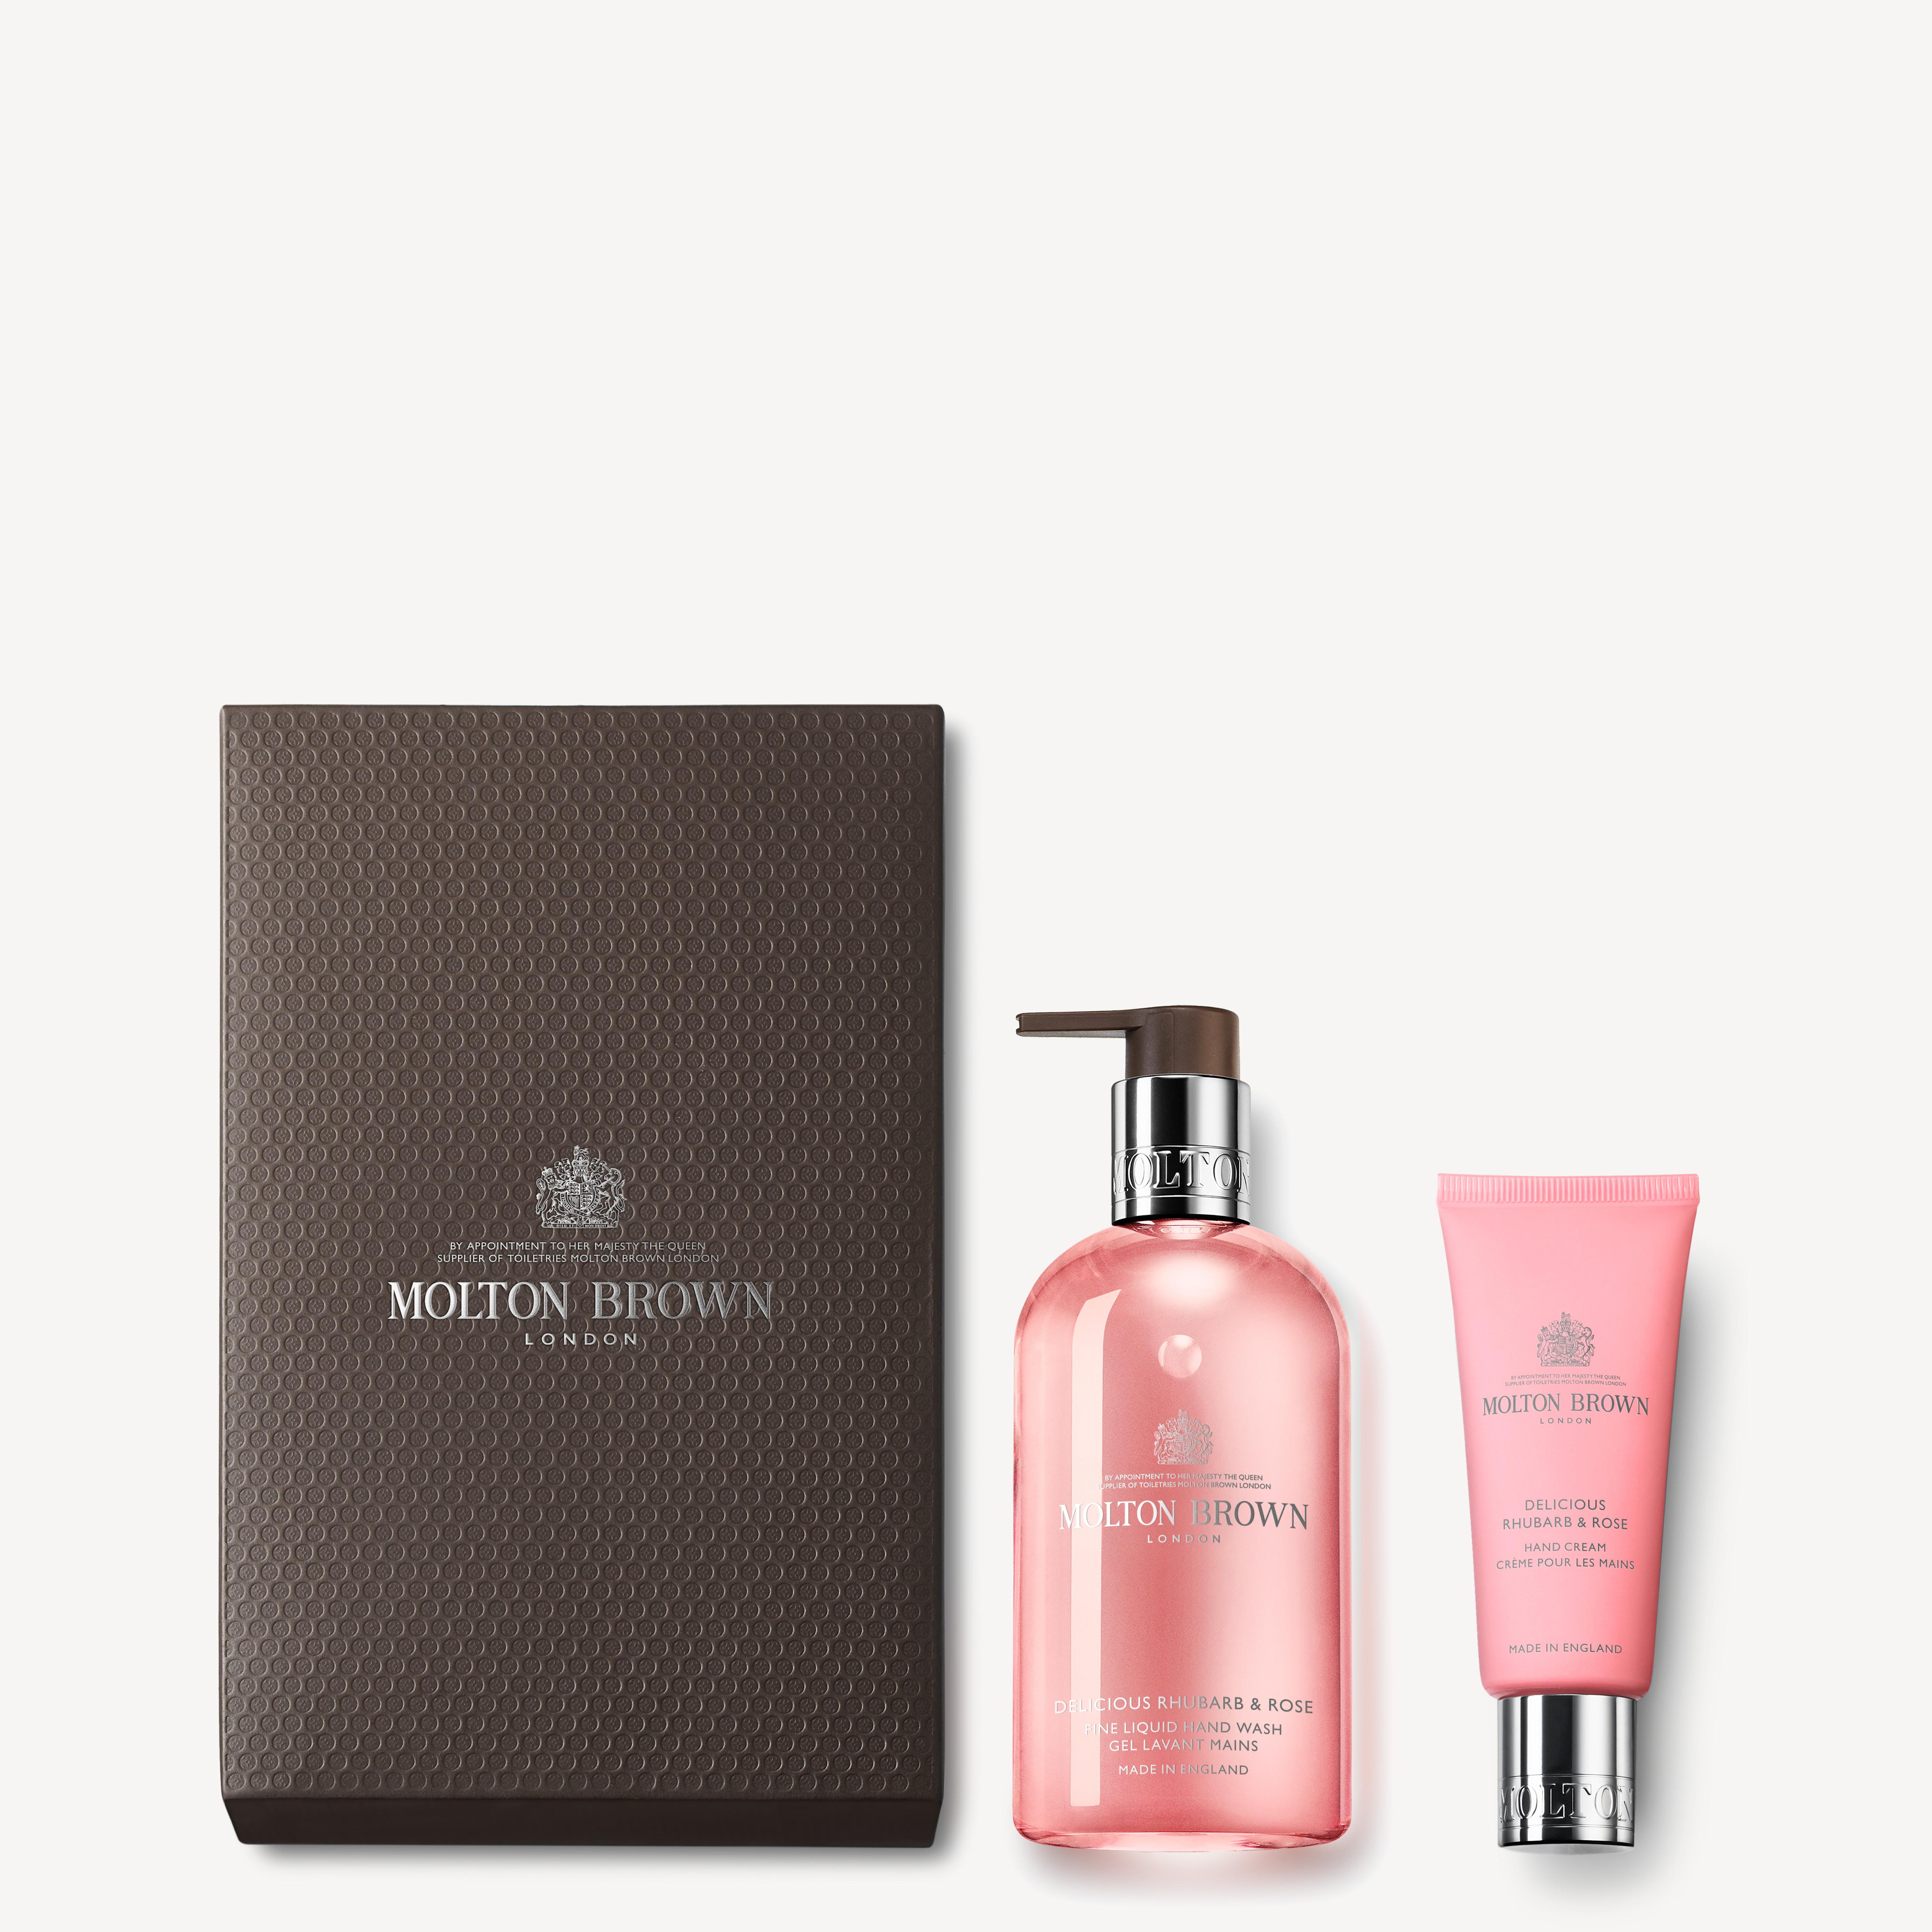 Molton Brown Delicious Rhubarb & Rose Hand Care Duo Gift Set